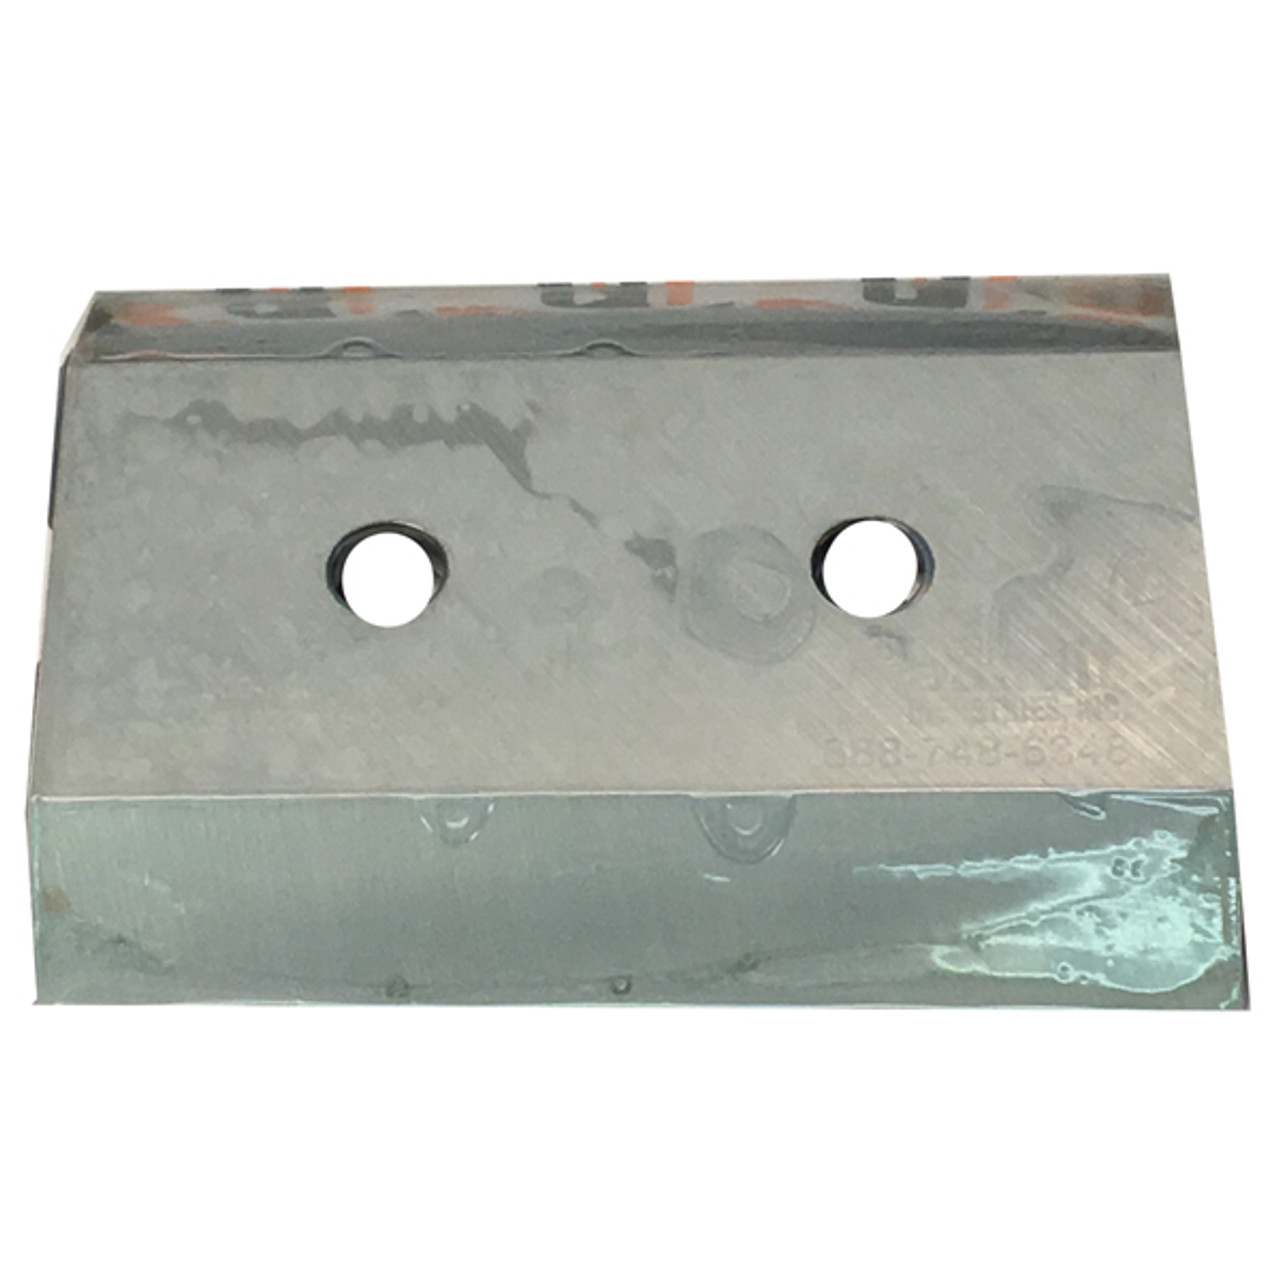 900-9901-10: Knife, 1/2 X 4 X 5-1/8 Dbe For M280/90